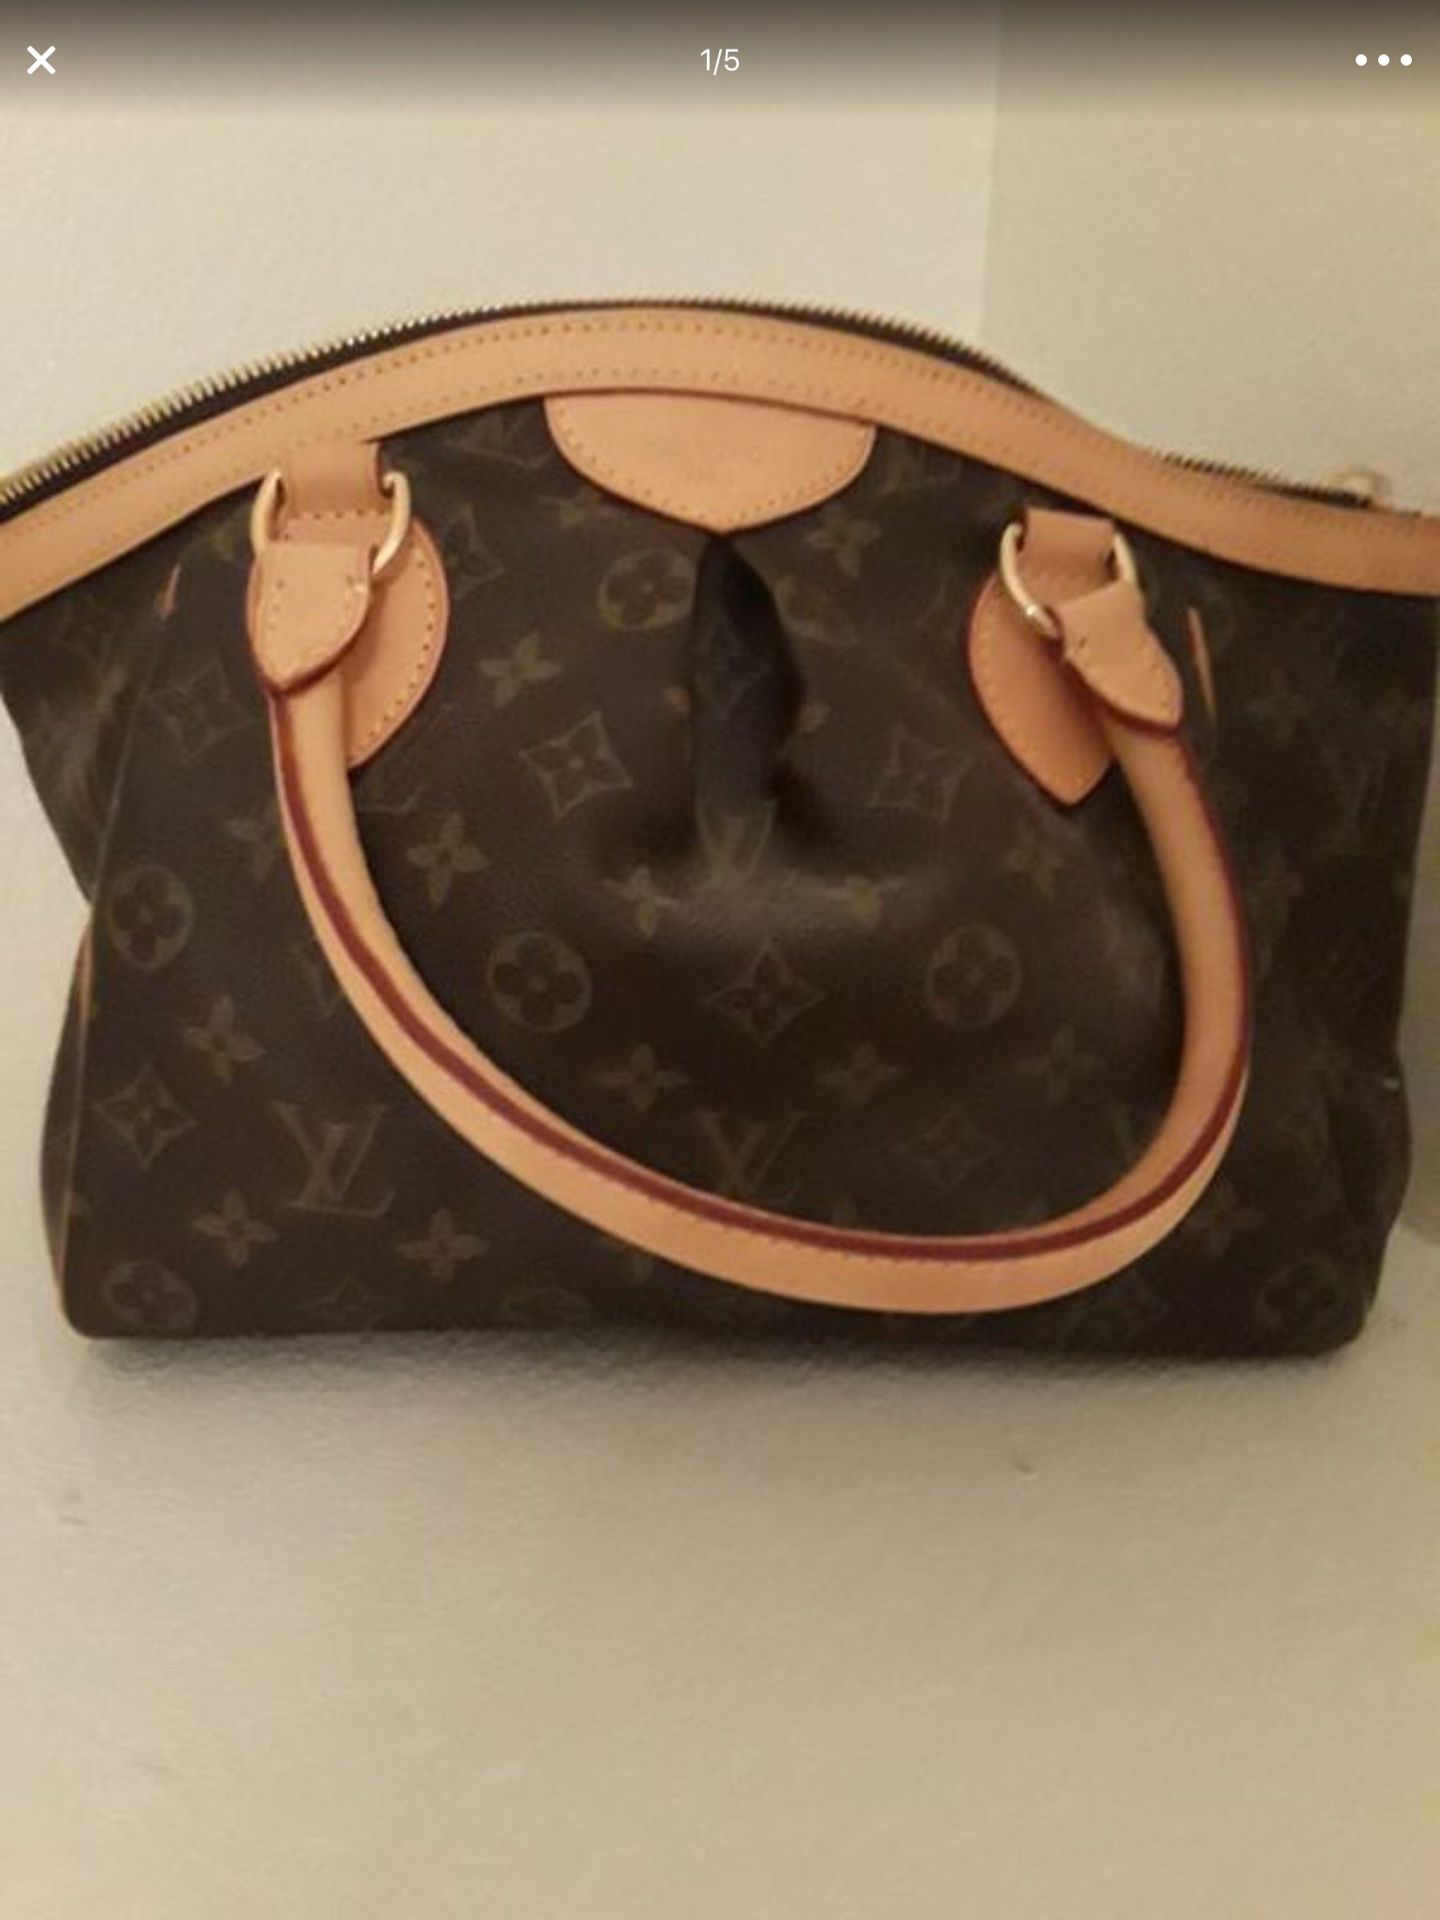 used authentic lv bags